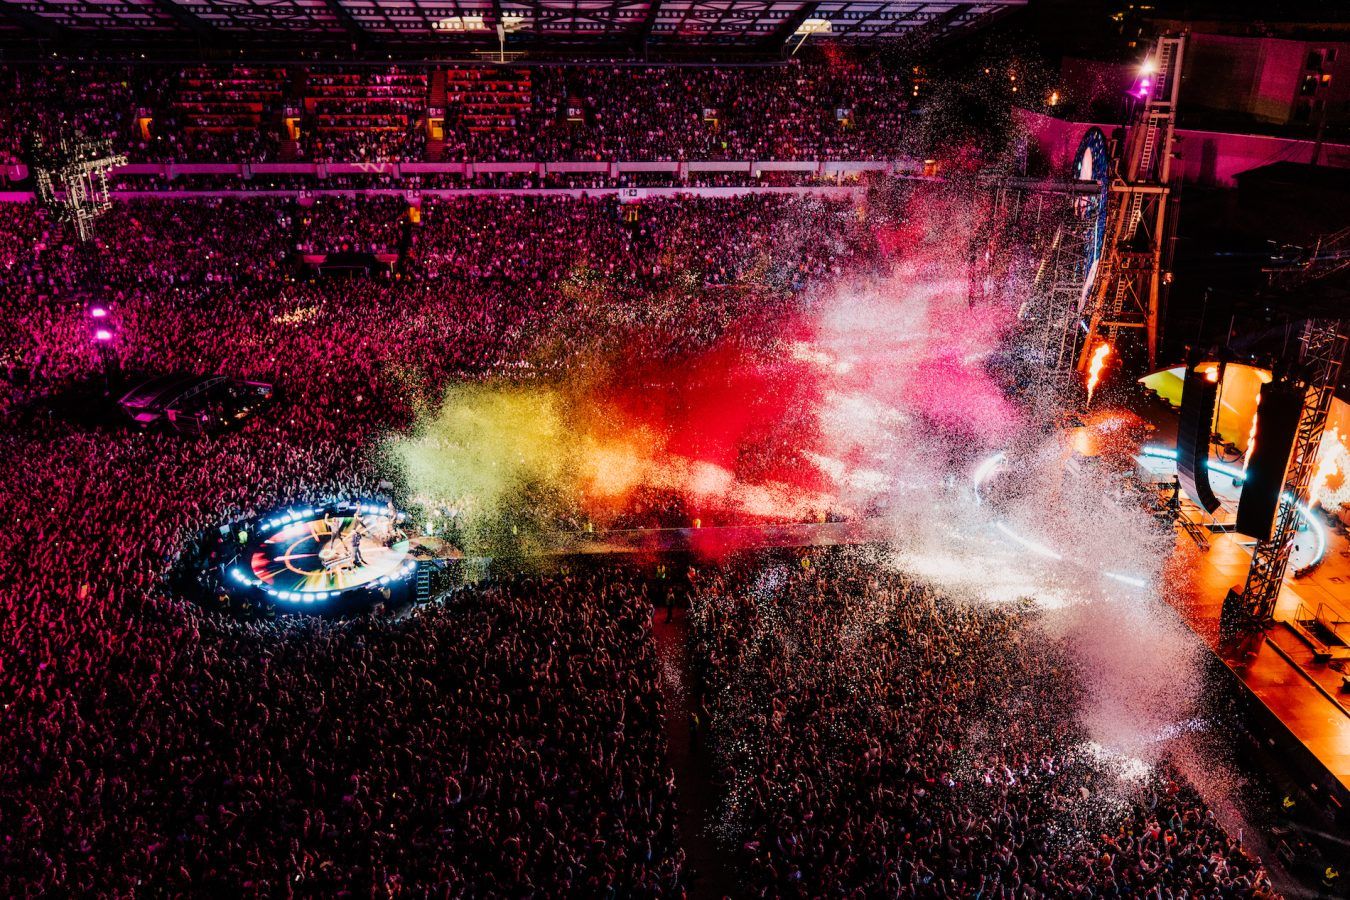 Coldplay in Singapore Band to release additional tickets on 3 October